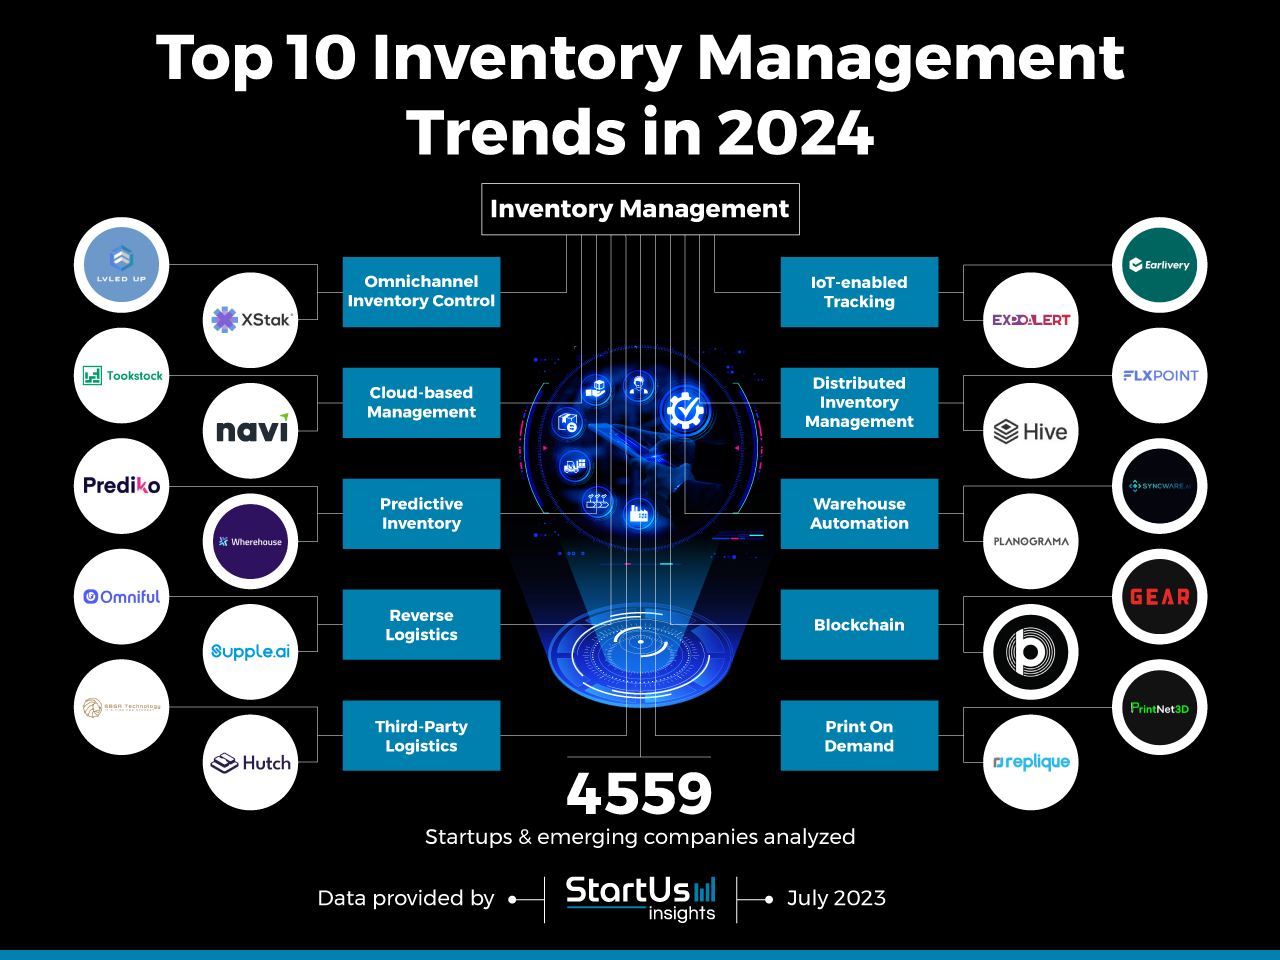 Top 10 Inventory Management Trends in 2024